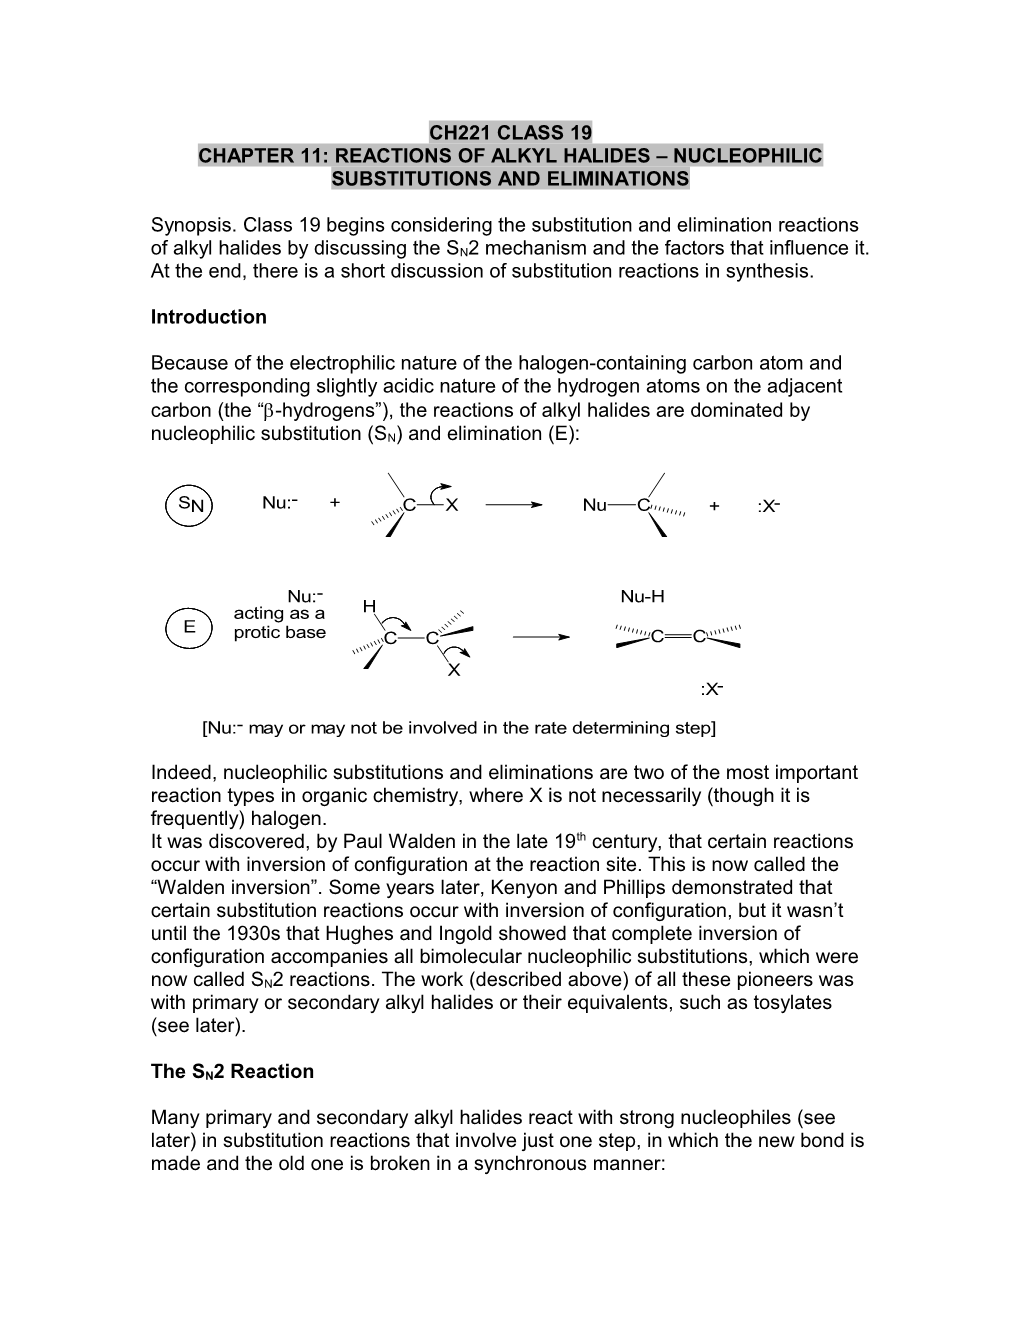 Chapter 11: Reactions of Alkyl Halides Nucleophilic Substitutions and Eliminations